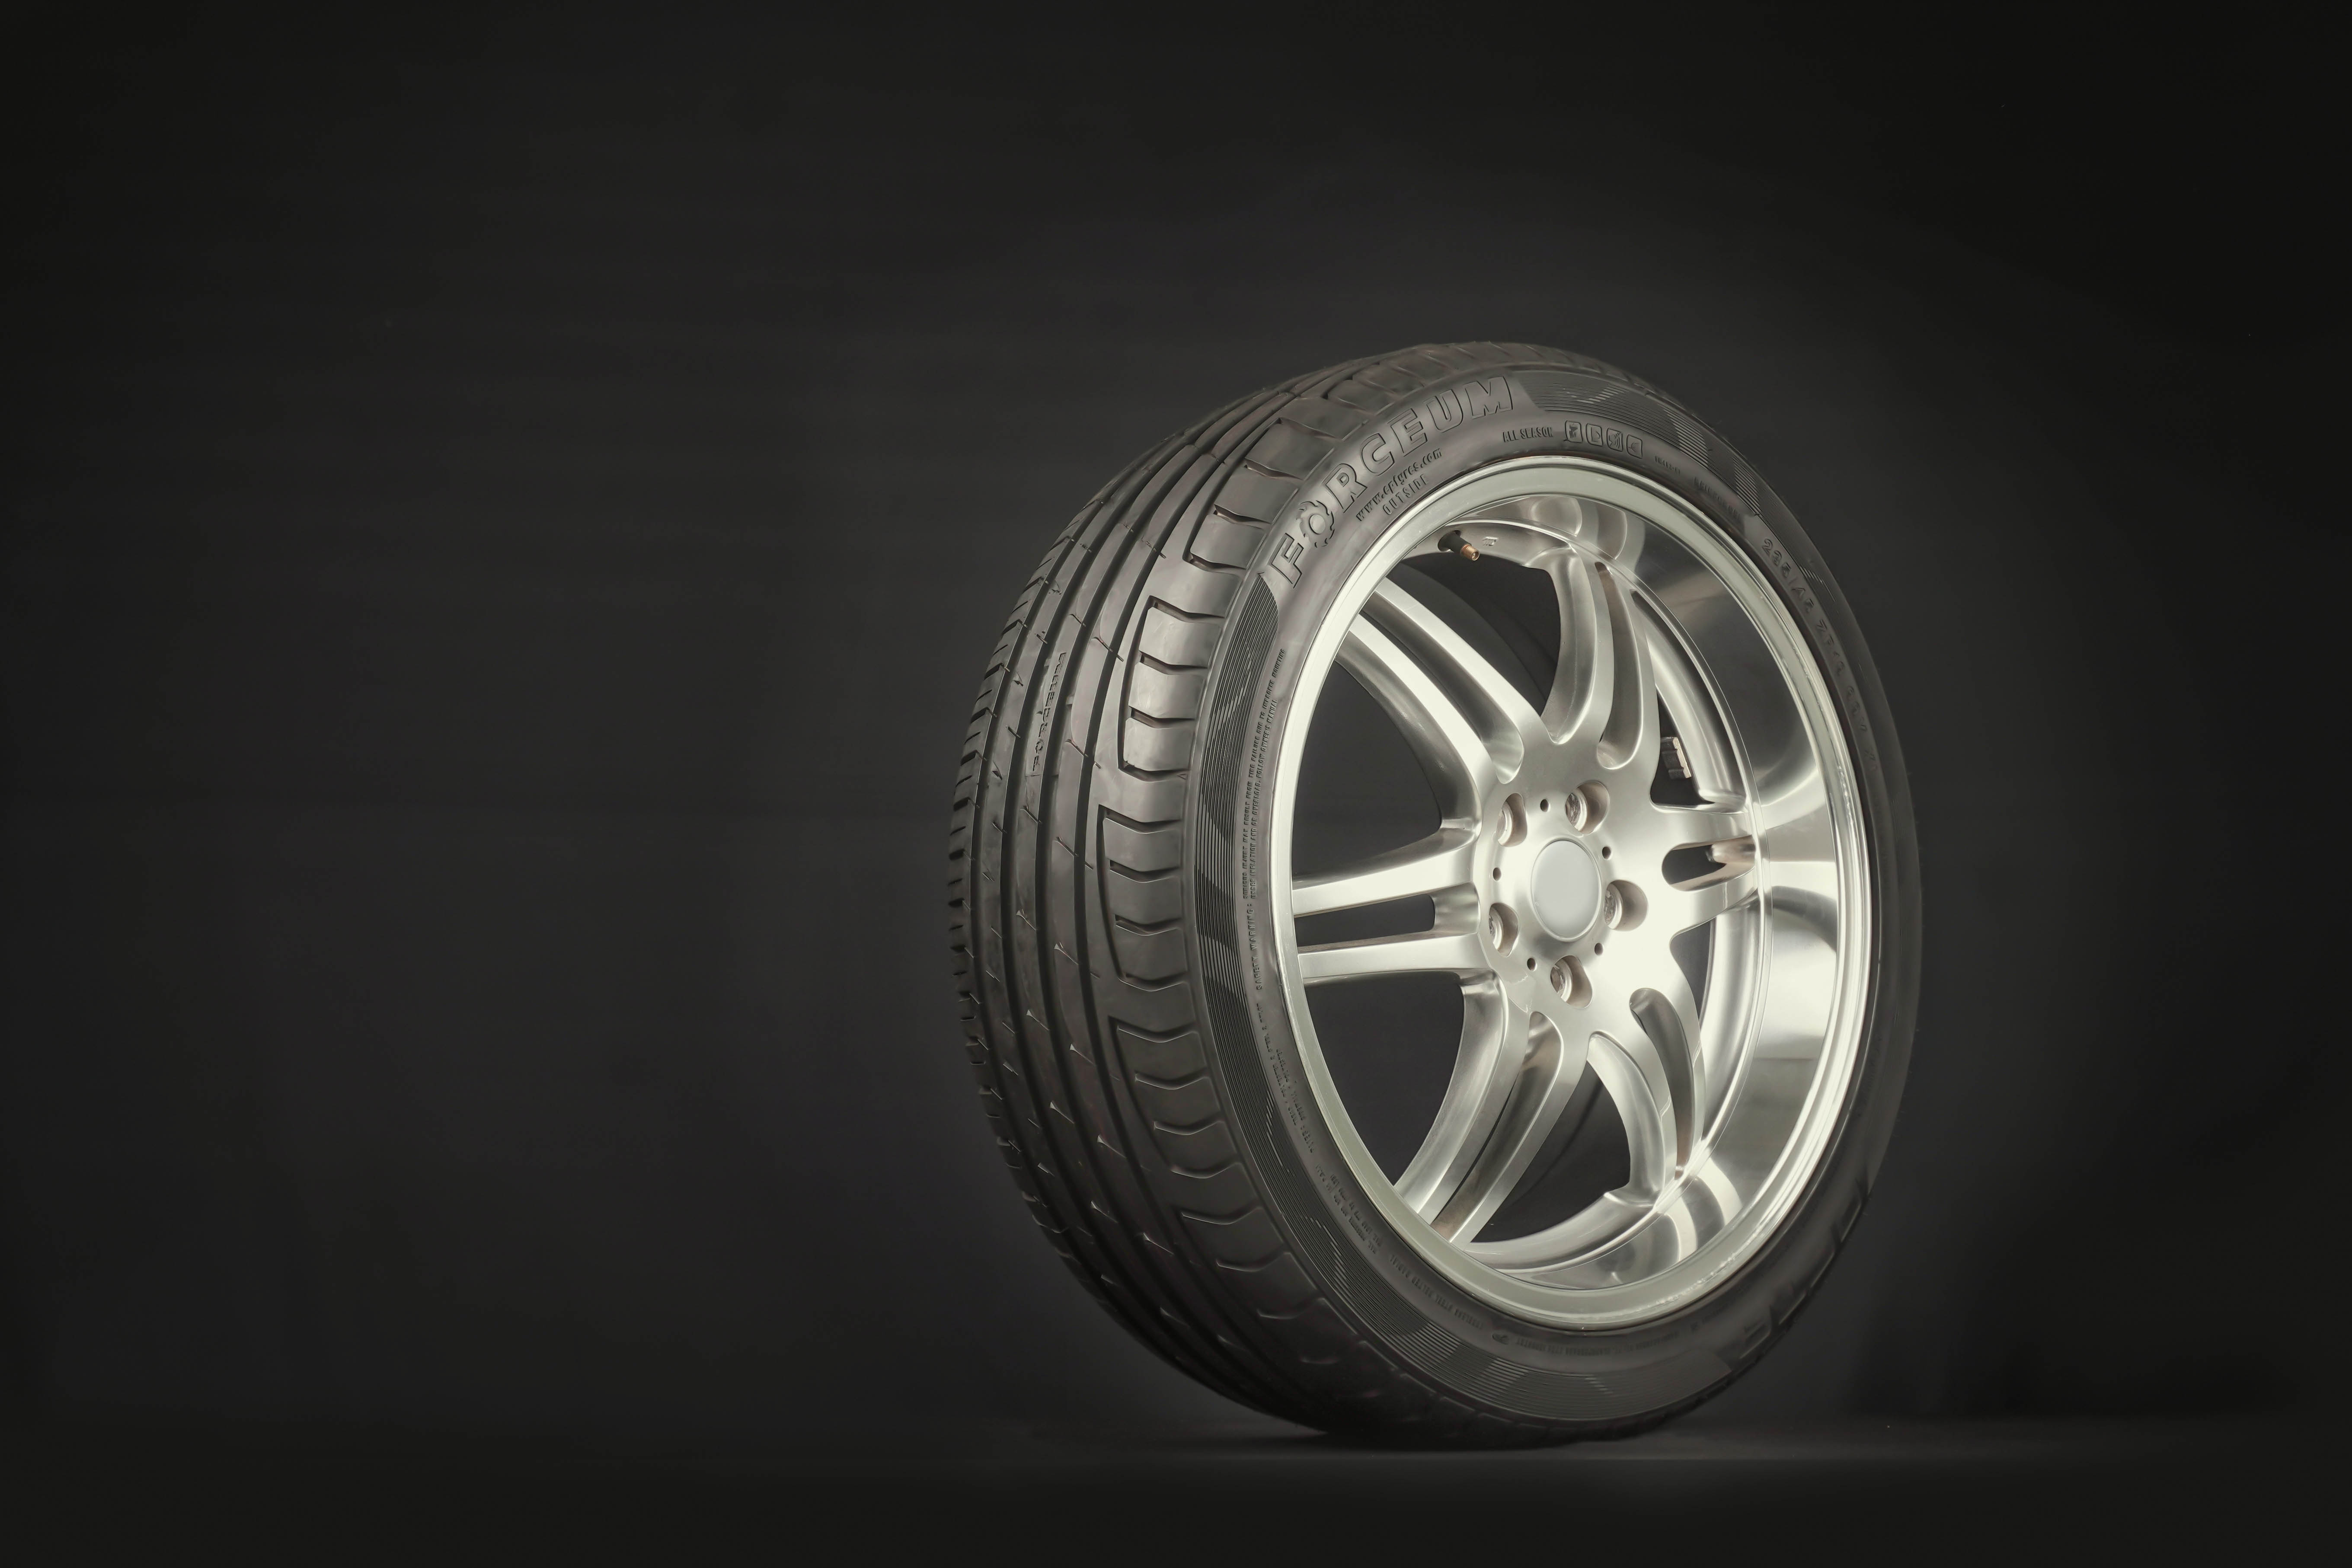 Choosing Forceum Tyres For Your Needs